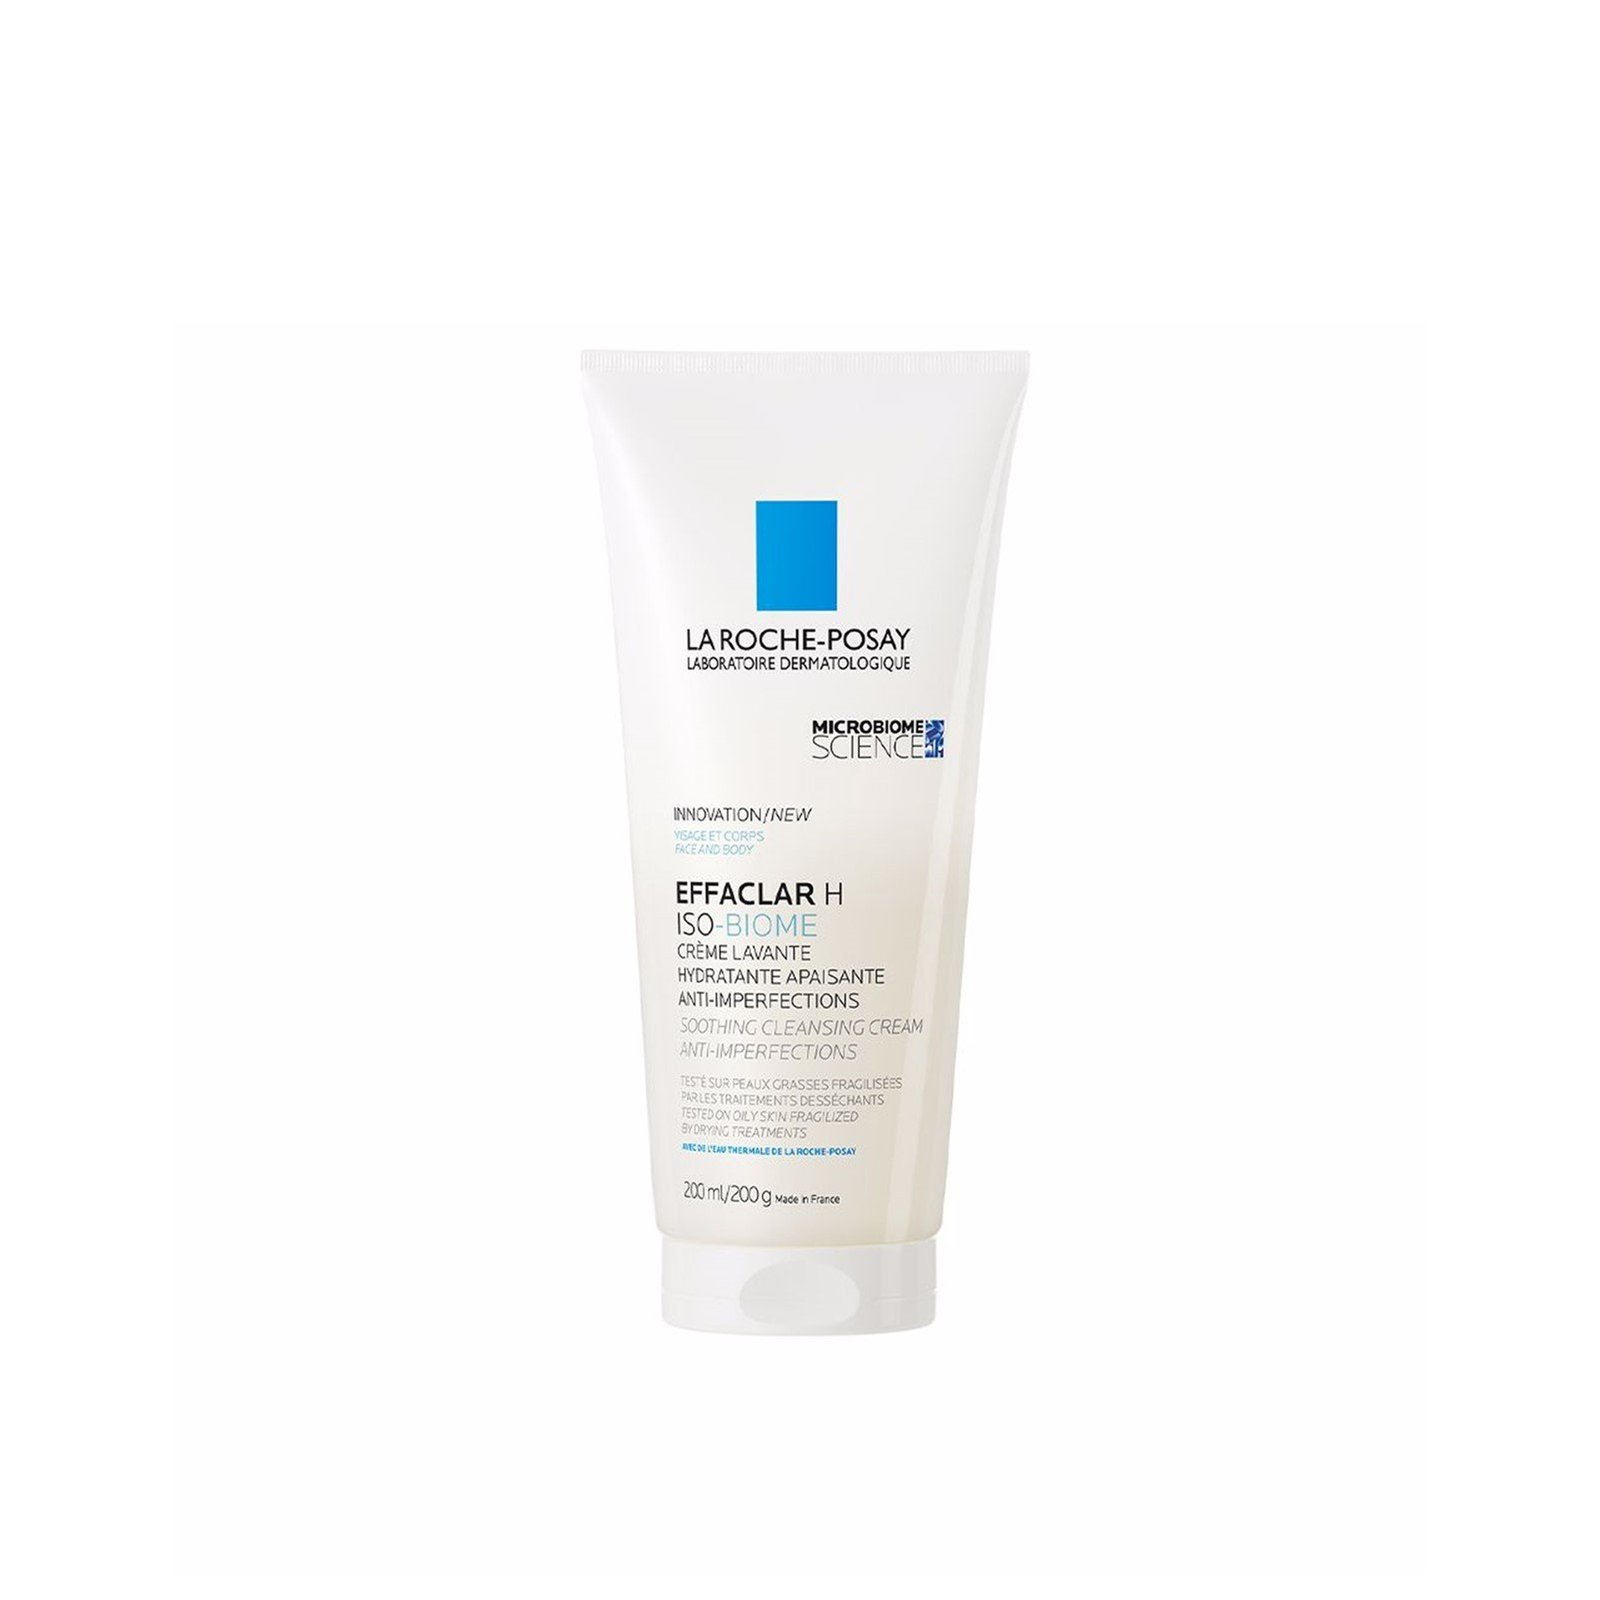 La Roche-Posay Effaclar H Iso-Biome Soothing Cleansing Cream 200ml